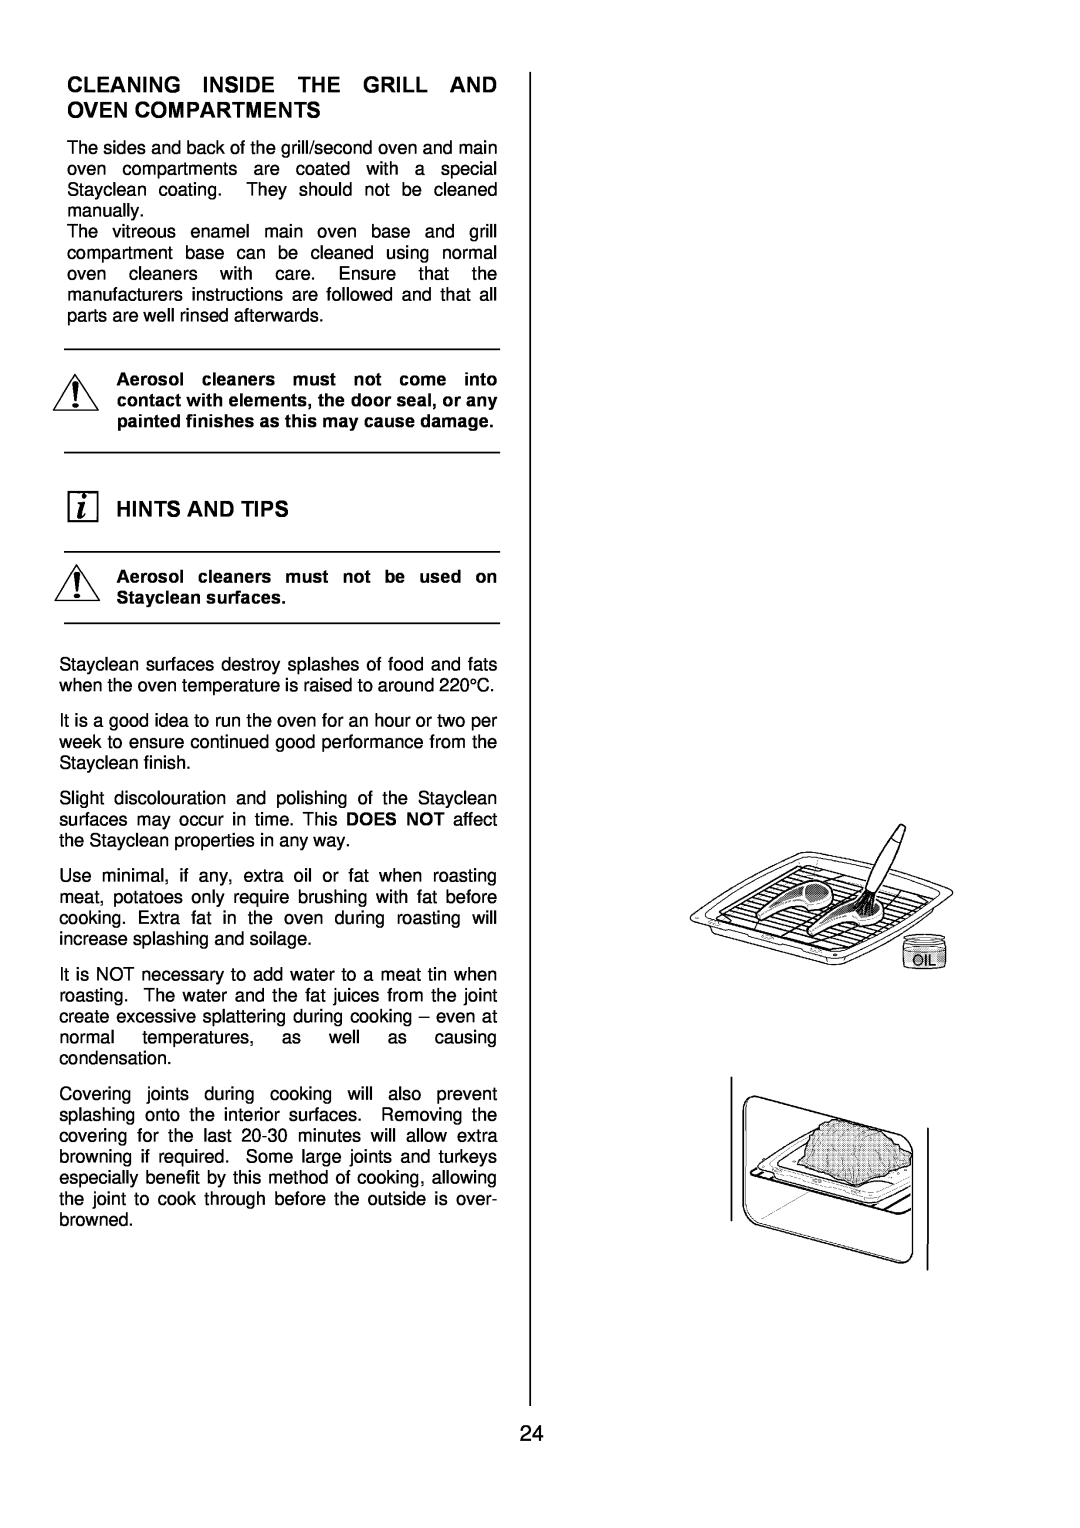 Electrolux EKC6045, EKC6044 manual Cleaning Inside The Grill And Oven Compartments, Hints And Tips 